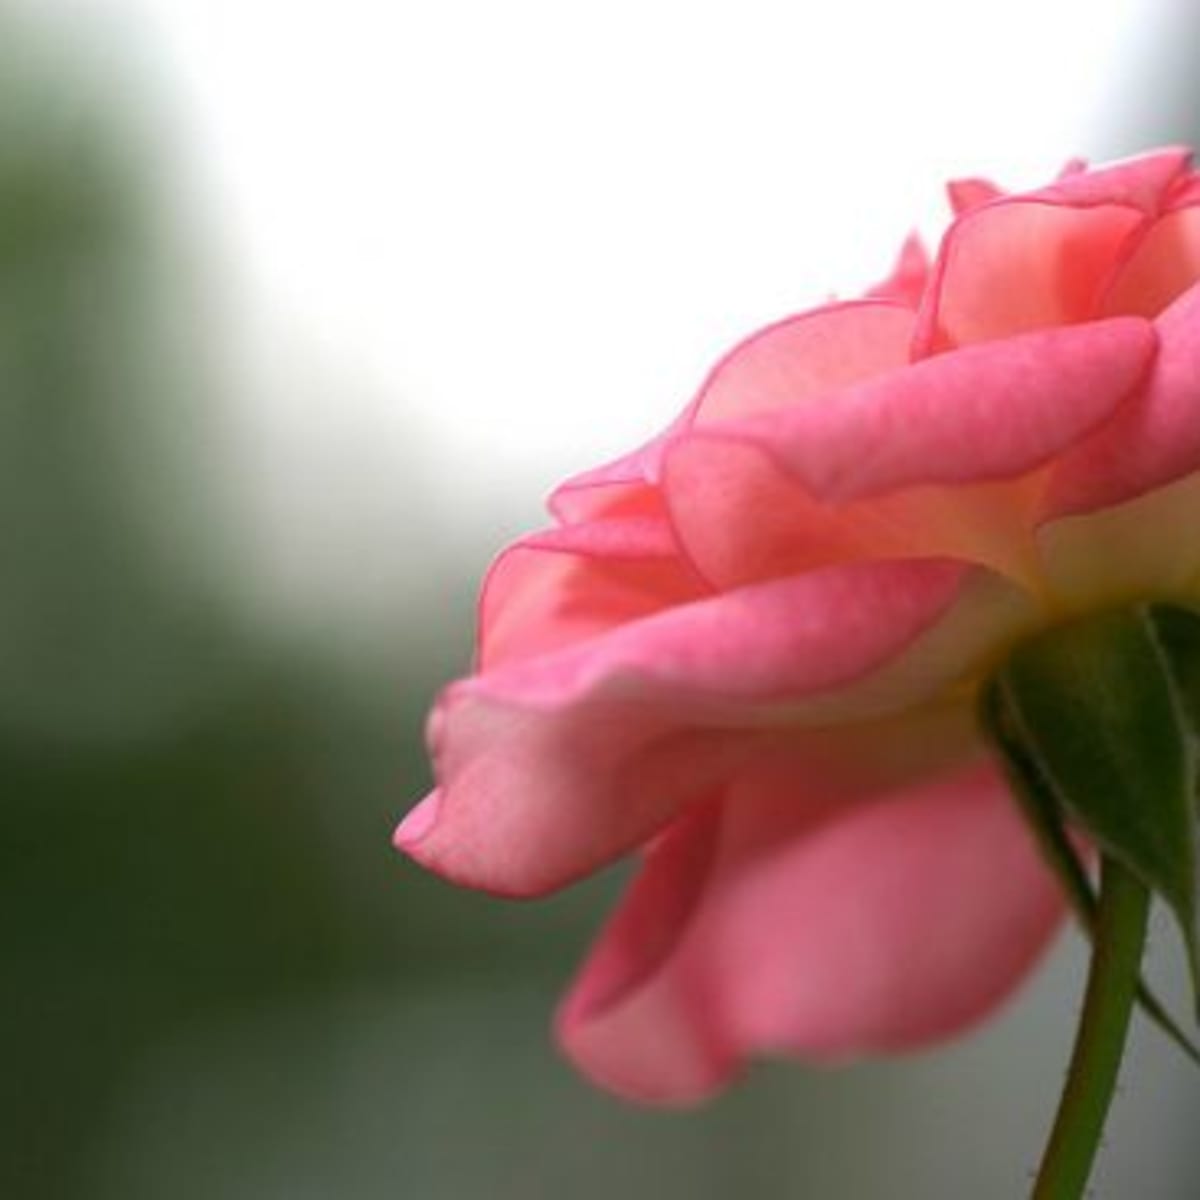 7 Natural Beauty Benefits of Roses - Organic Authority